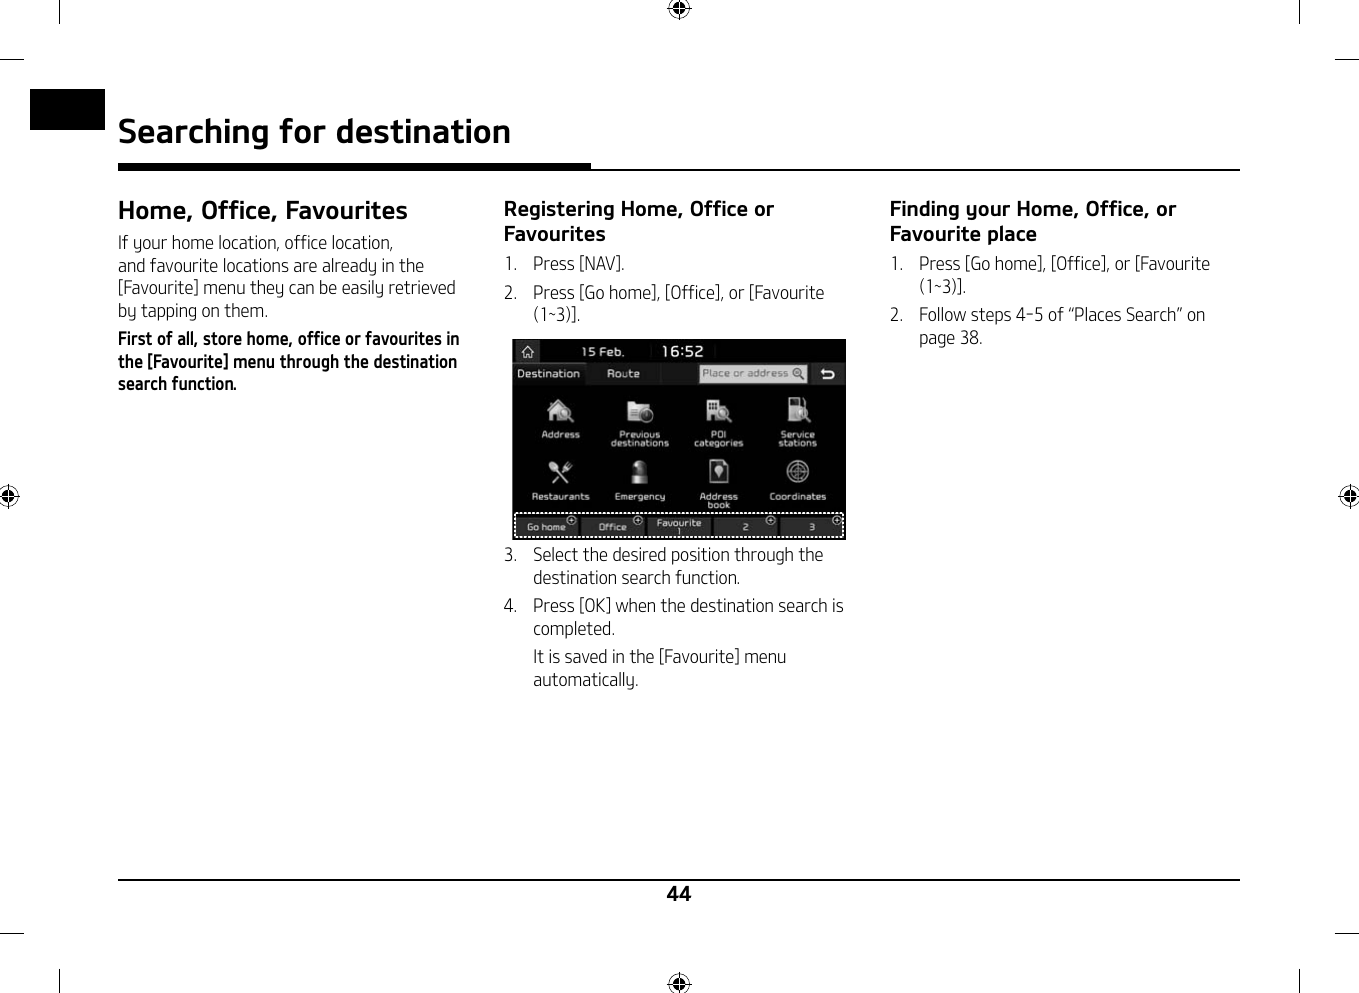 44Searching for destination Home, Office, FavouritesIf your home location, office location, and favourite locations are already in the [Favourite] menu they can be easily retrieved by tapping on them. First of all, store home, office or favourites in the [Favourite] menu through the destination search function.Registering Home, Office or Favourites1.   Press [NAV].2.   Press [Go home], [Office], or [Favourite (1~3)].3.   Select the desired position through the destination search function.4.   Press [OK] when the destination search is completed.   It is saved in the [Favourite] menu automatically.Finding your Home, Office, or Favourite place1.   Press [Go home], [Office], or [Favourite (1~3)].2.  Follow steps 4-5 of 䳖Places Search䳗 on page 38.